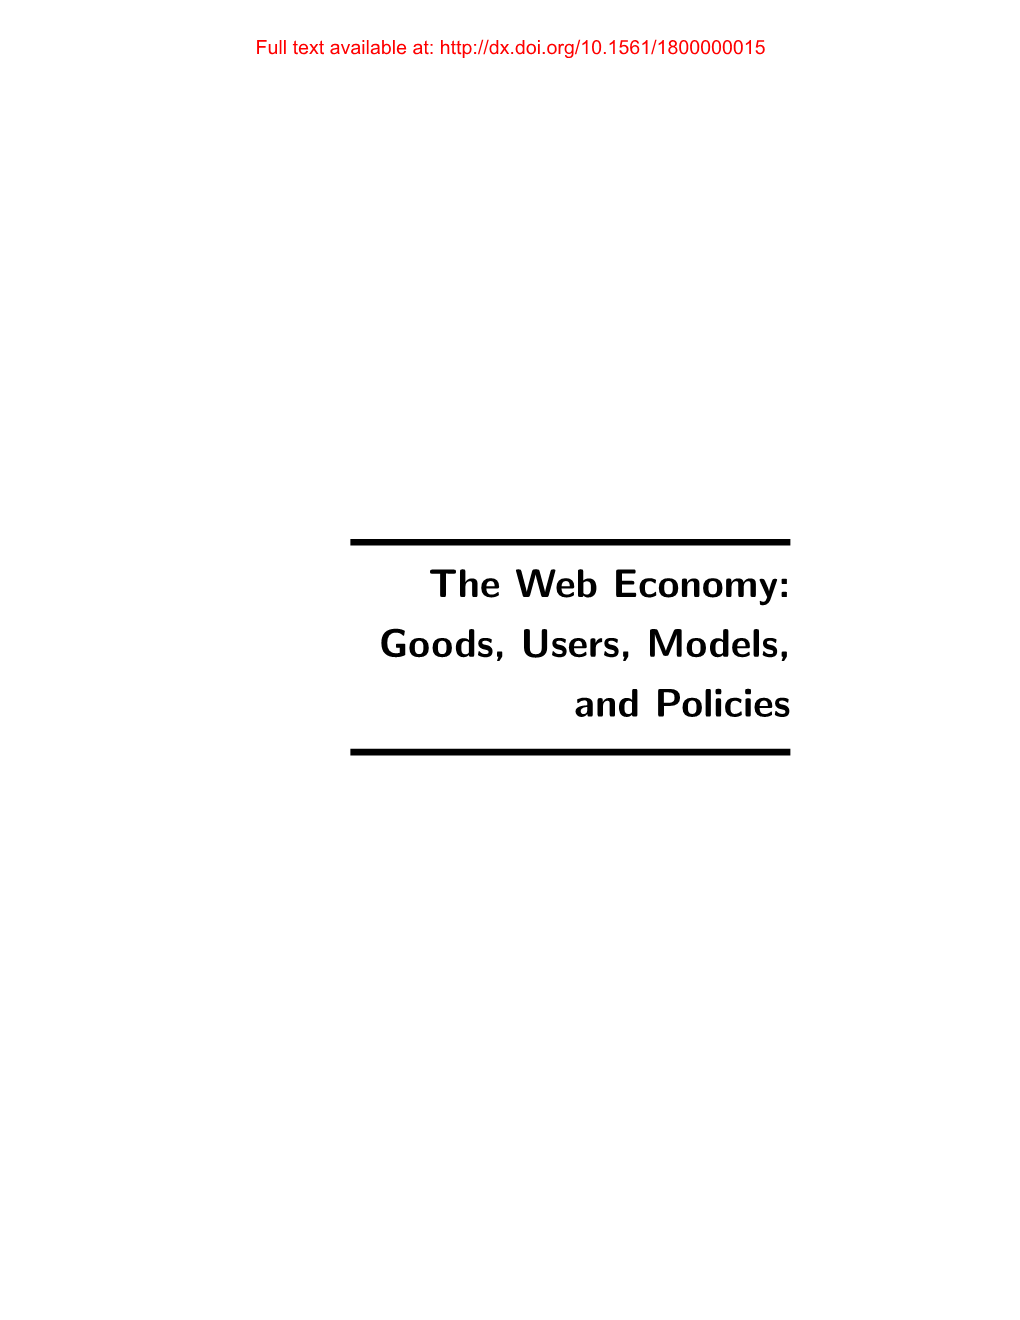 The Web Economy: Goods, Users, Models, and Policies Full Text Available At